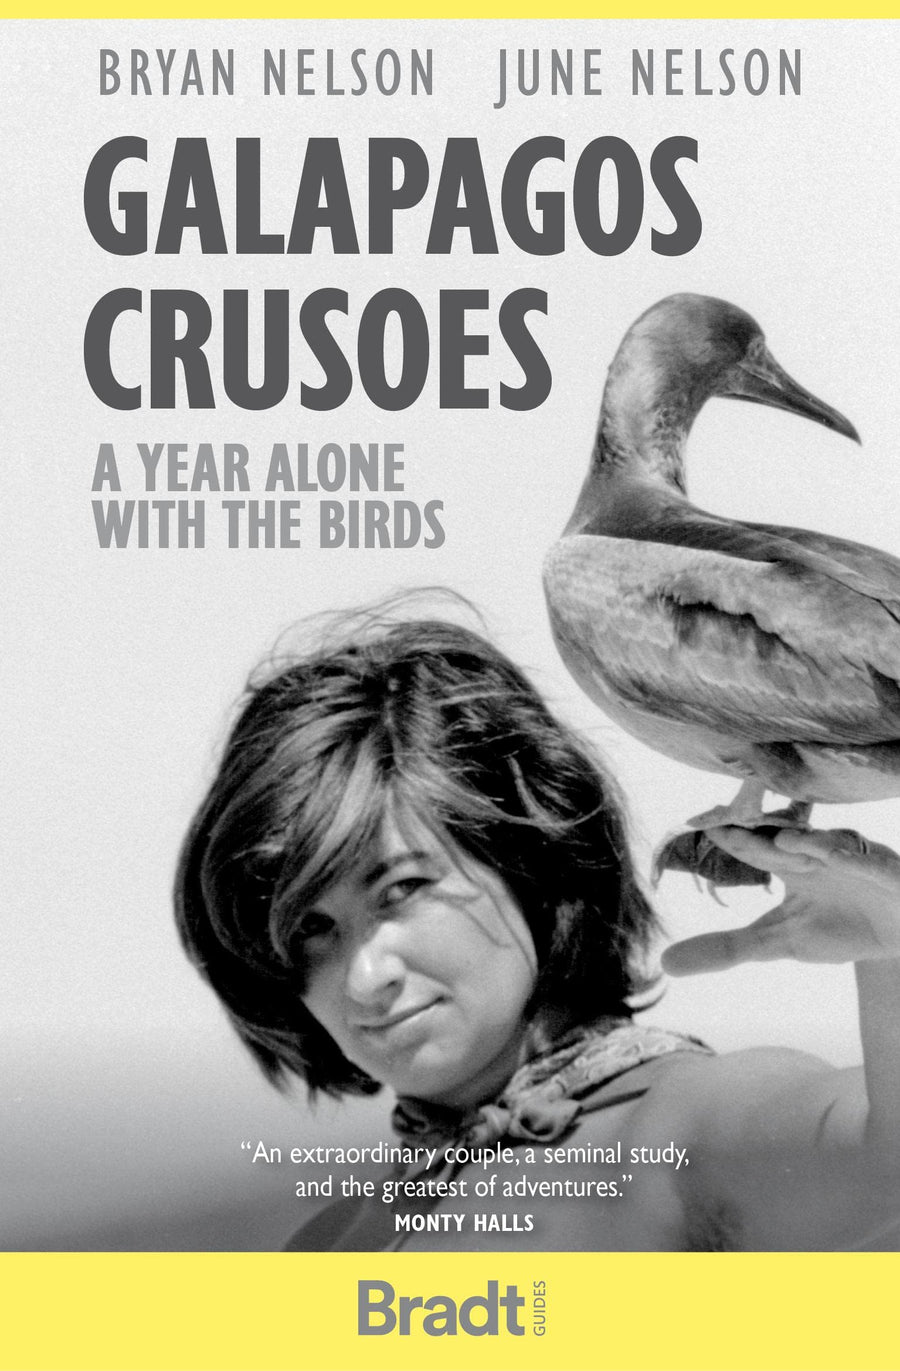 Livre de voyage (en anglais) - Galapagos Crusoes A year alone with the birds | Bradt guide de voyage Bradt 